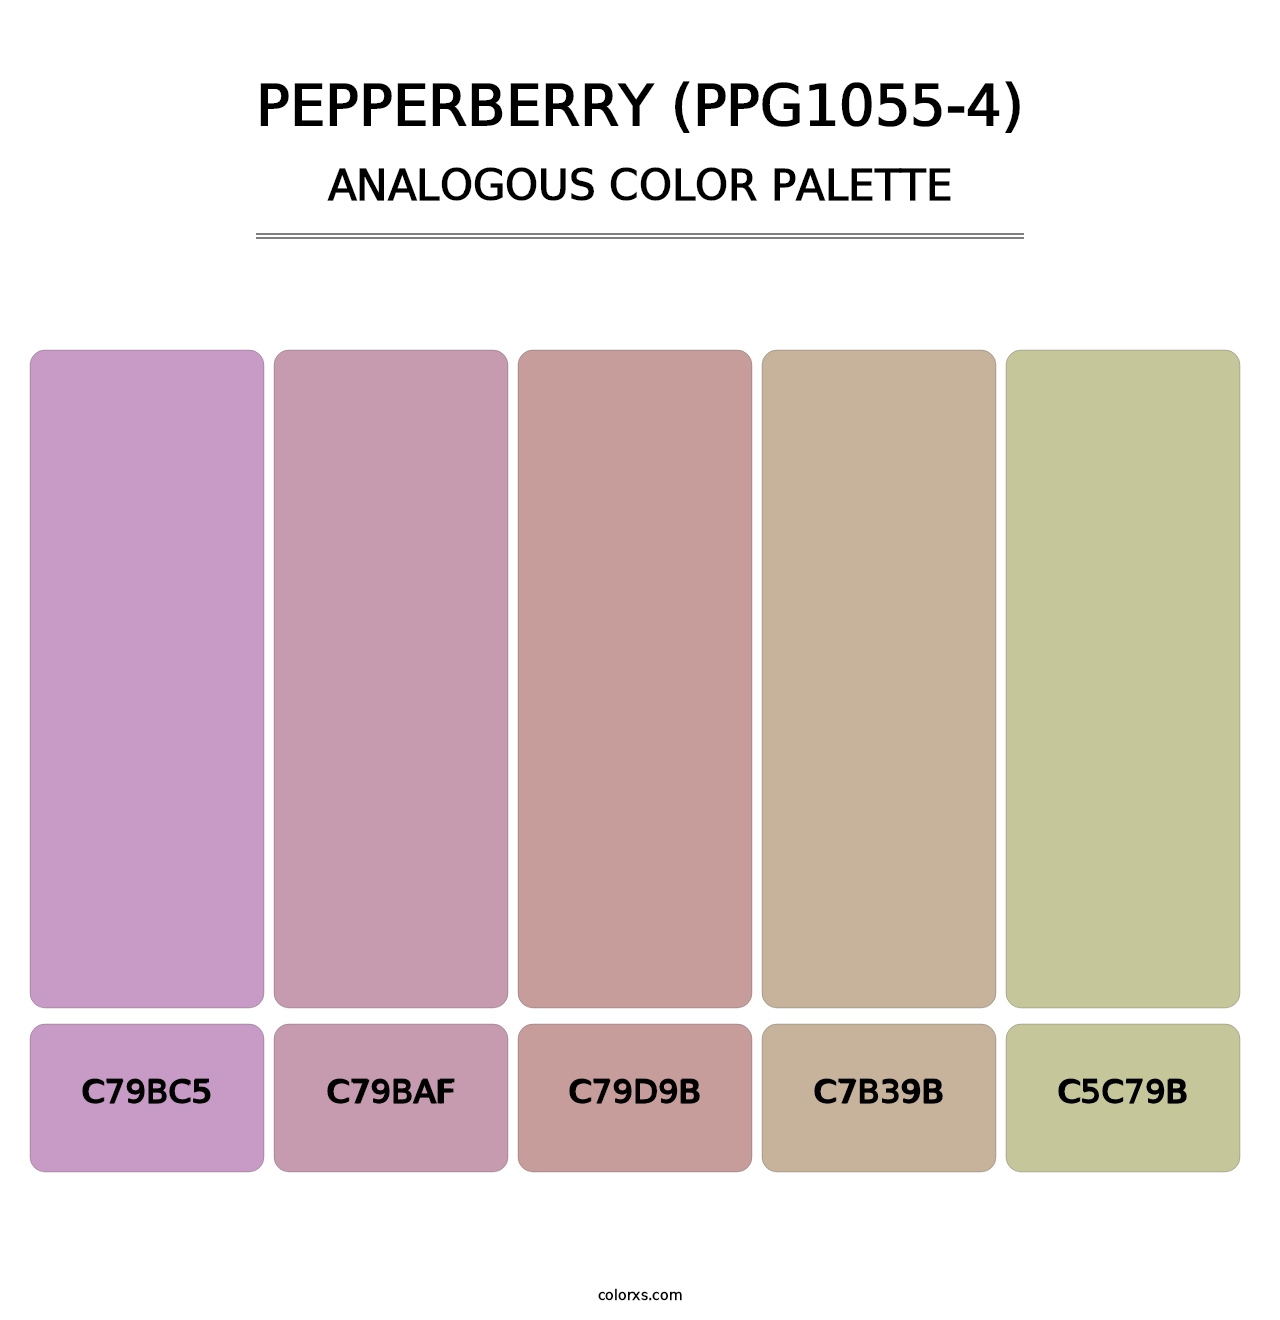 Pepperberry (PPG1055-4) - Analogous Color Palette